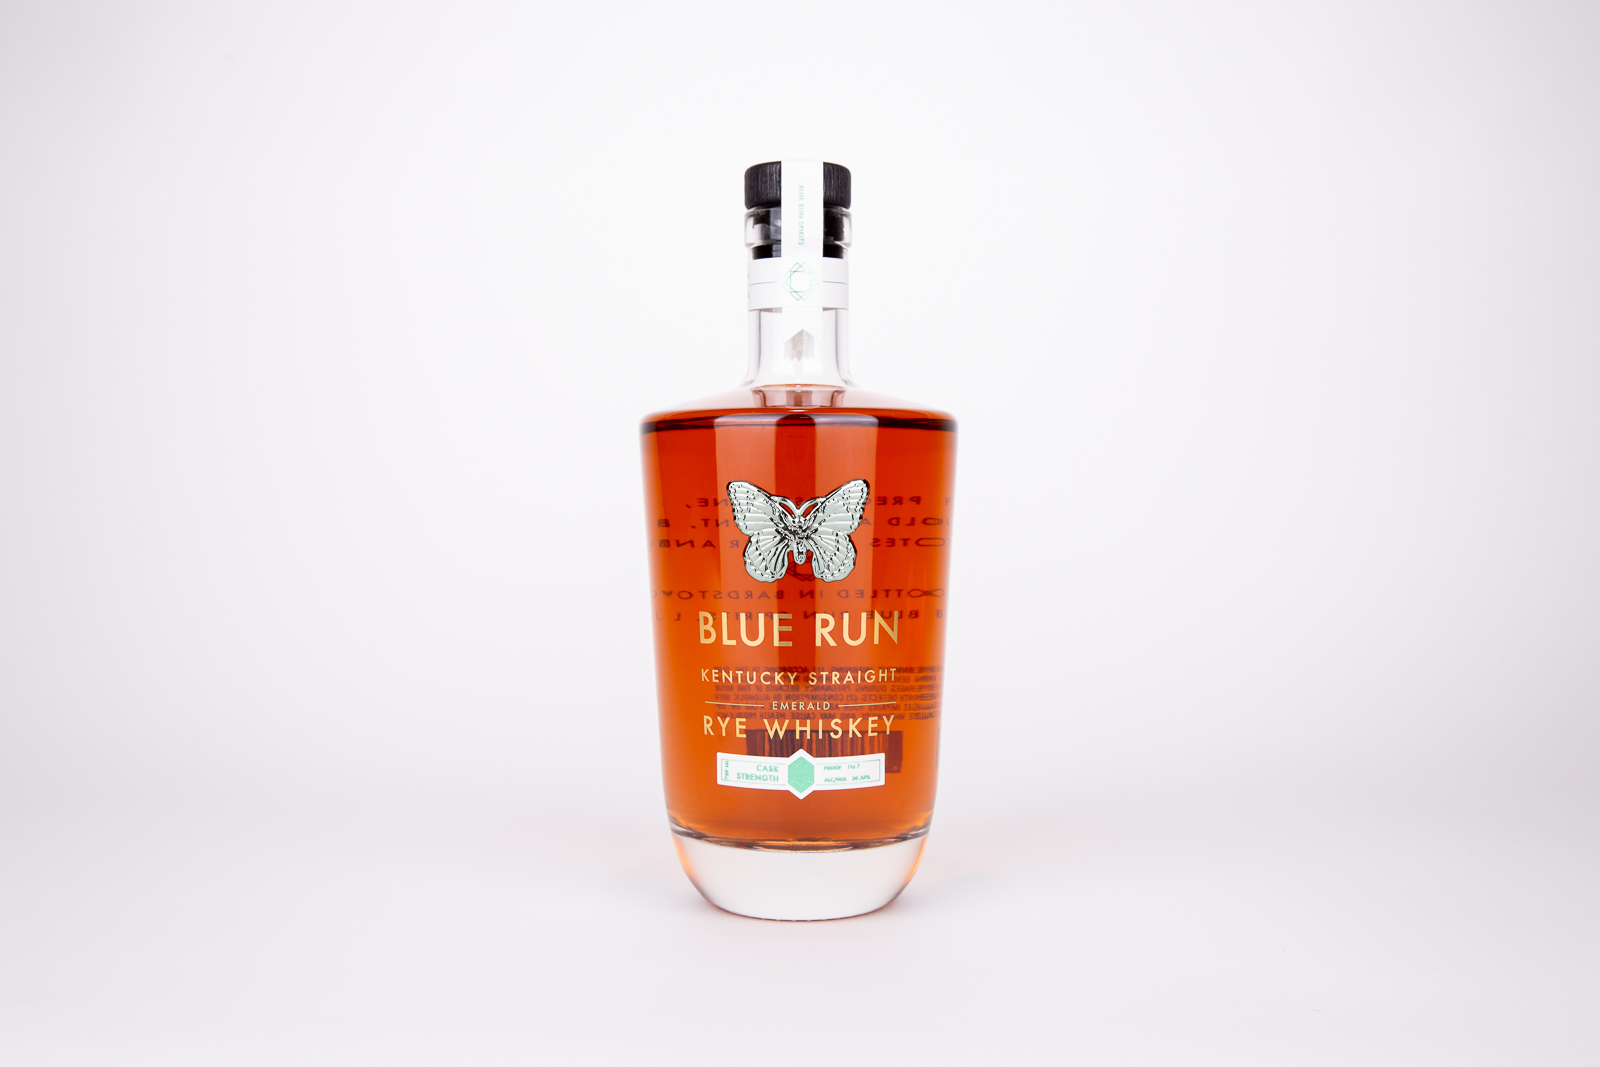 Blue Run Spirits Hires Trey Wade to Develop and Lead Private Barrel Program